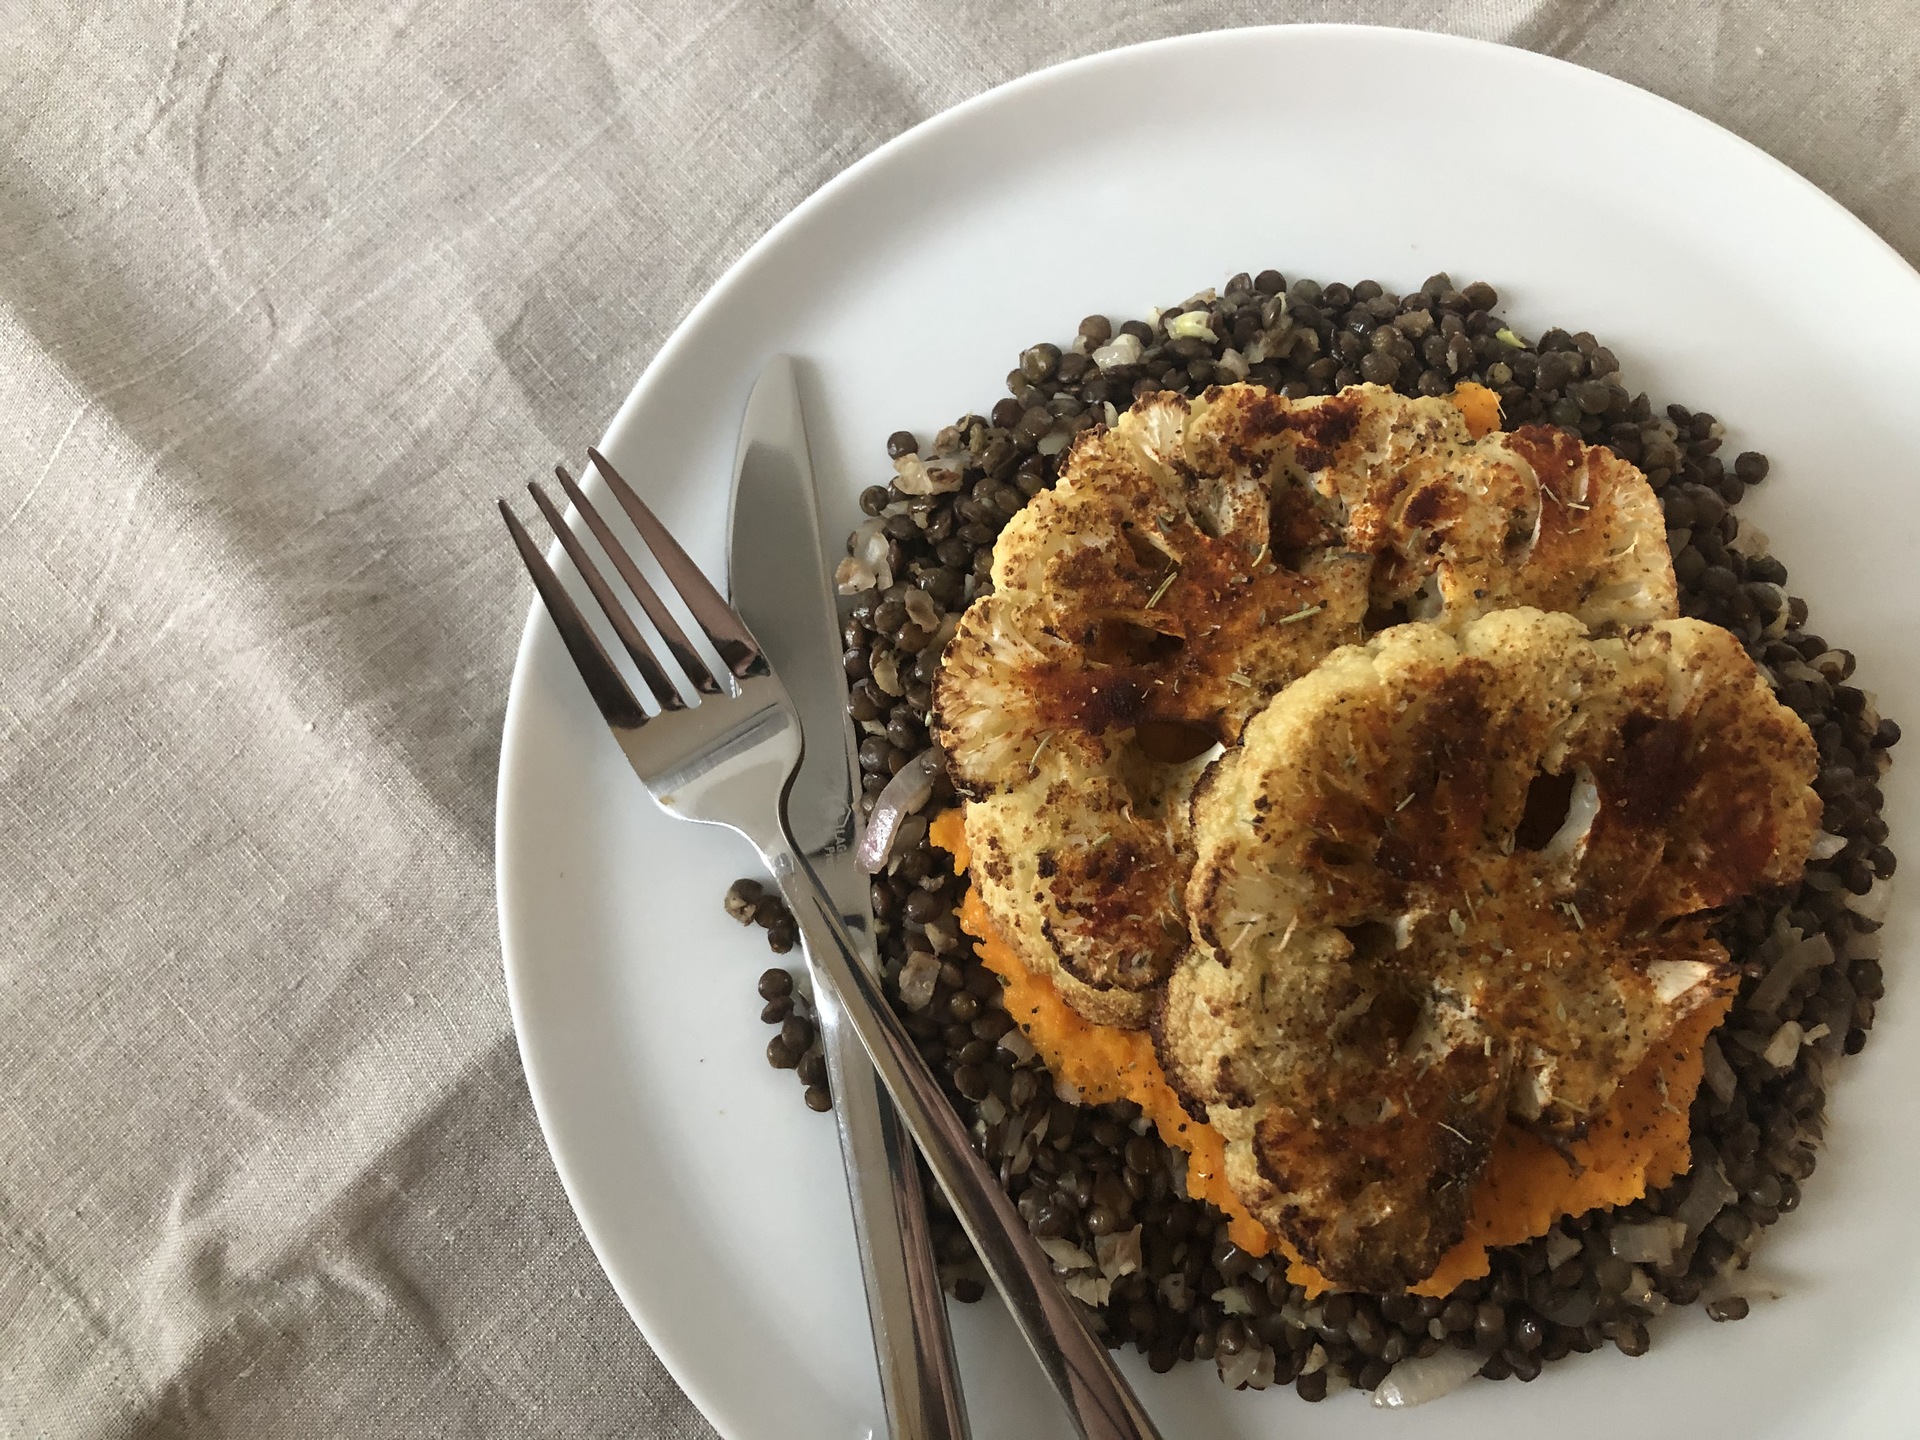 Cauliflower steak with carrots and lentils